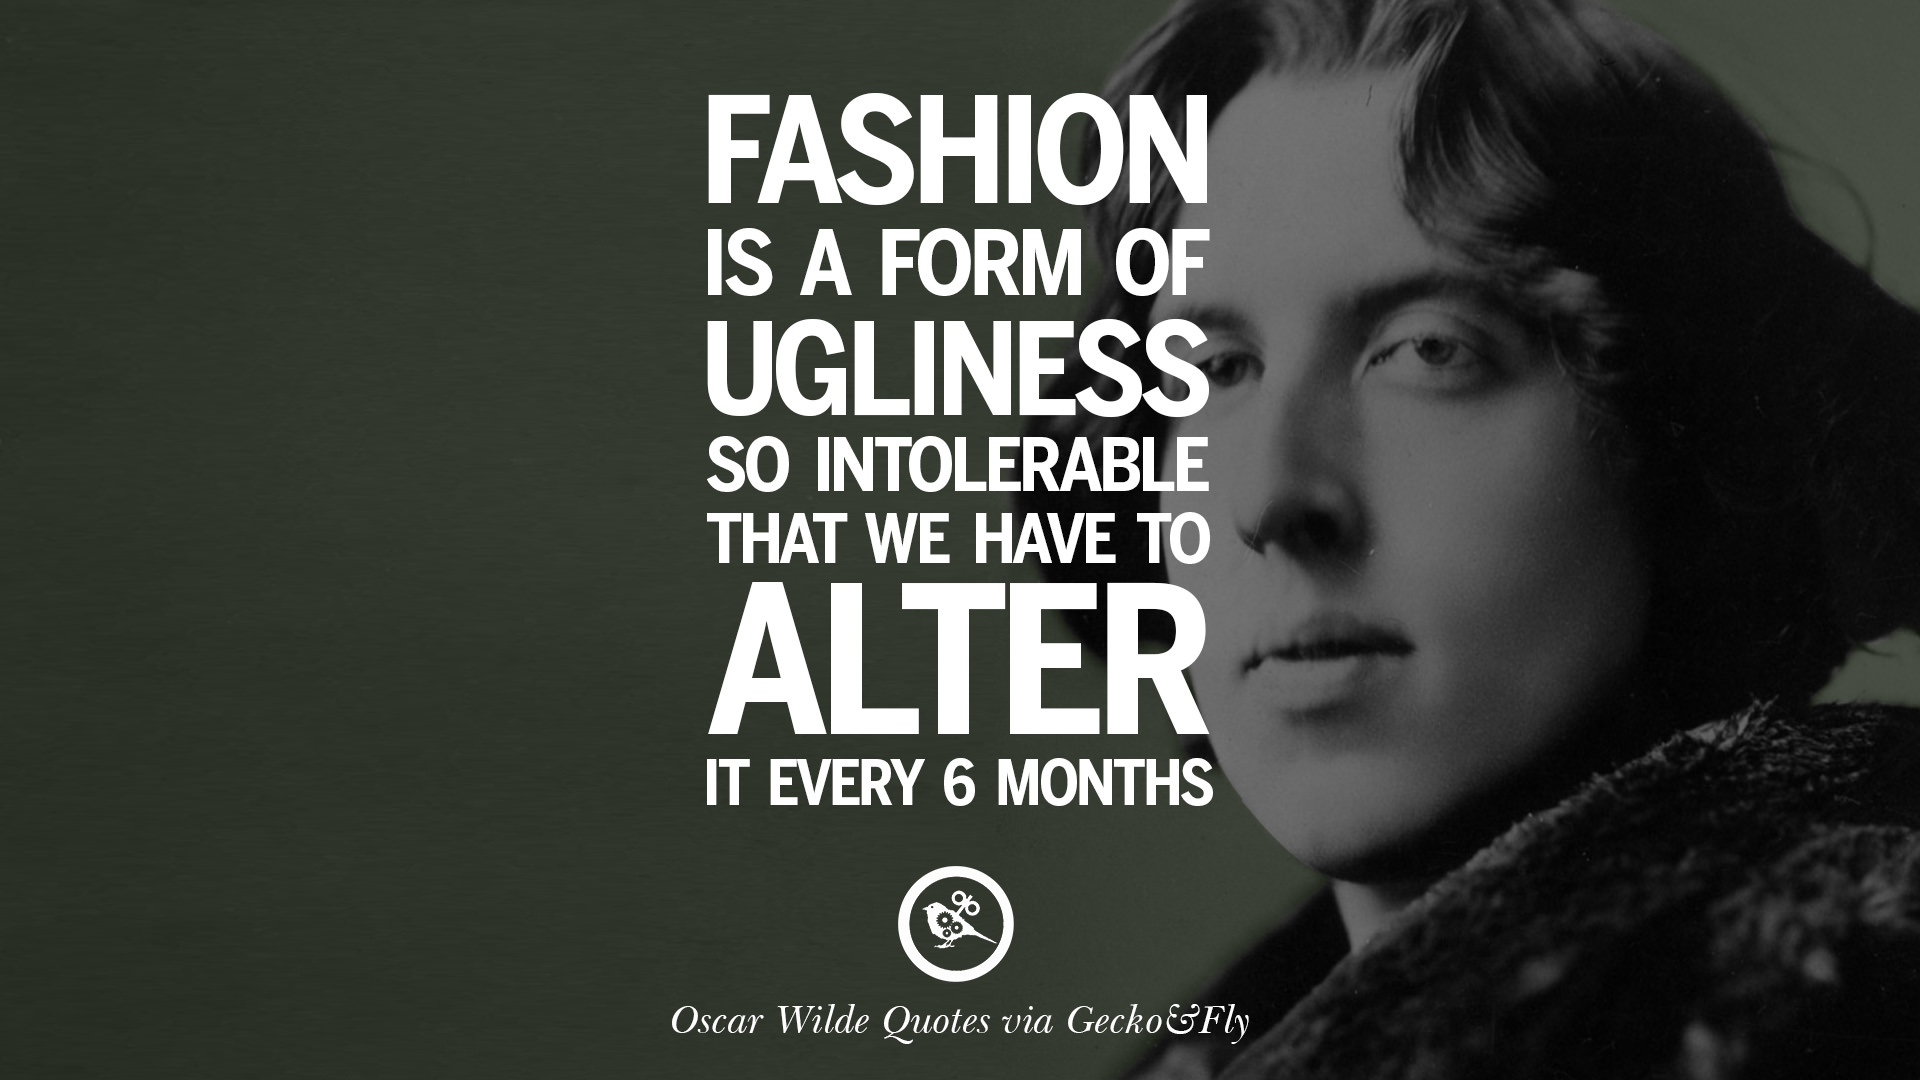 great oscar wilde quotes